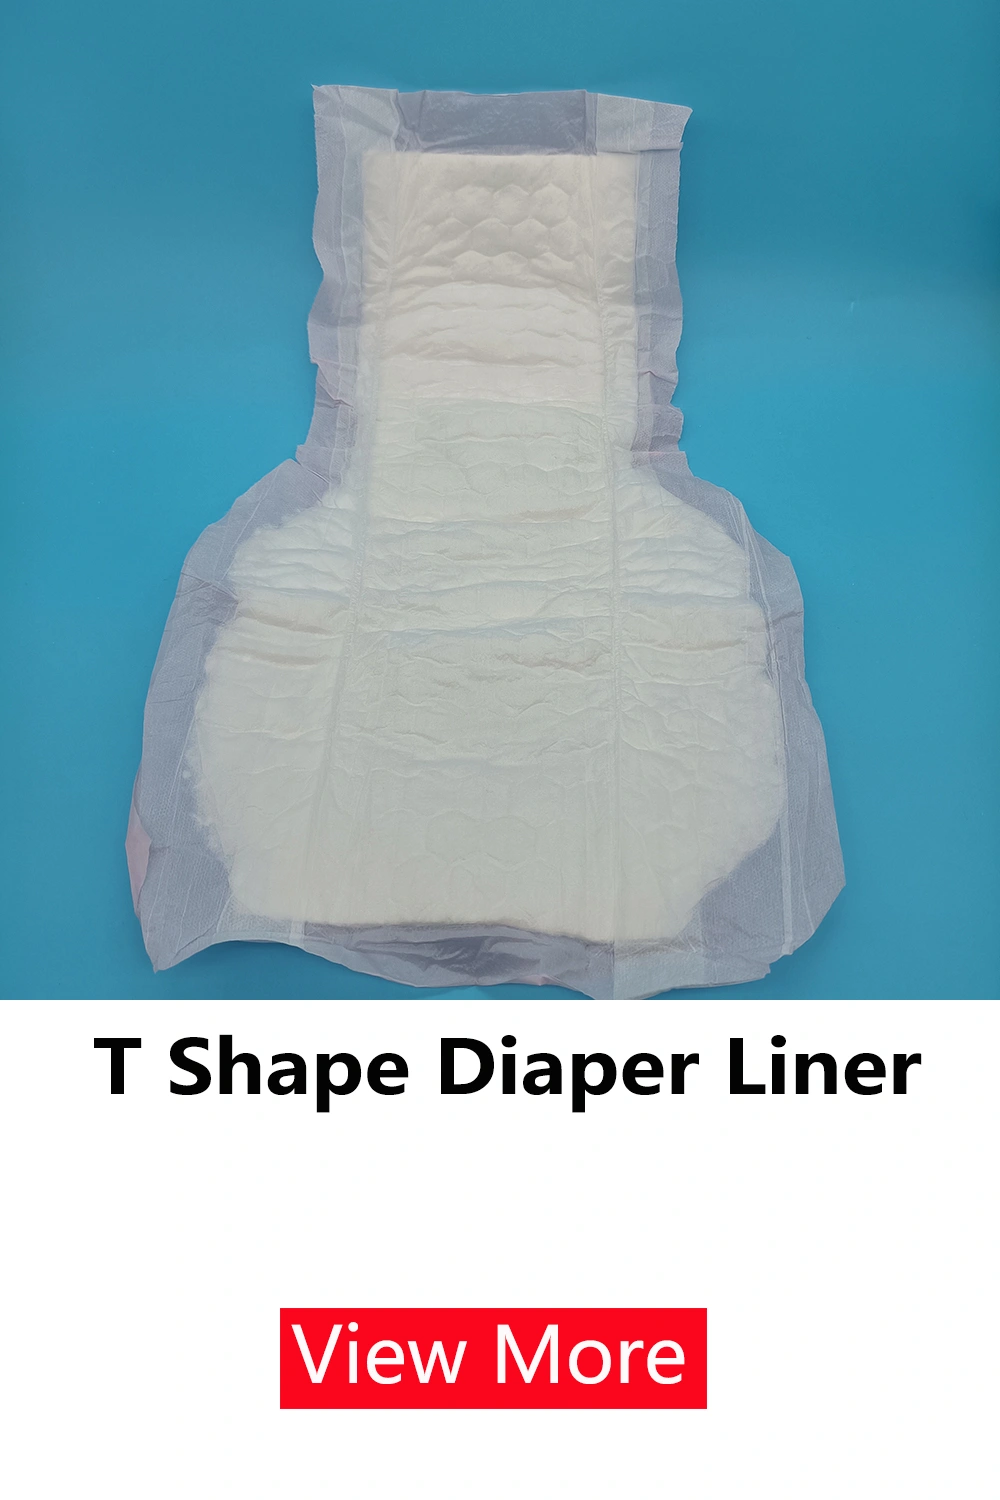 Bamboo Charcoal Pad and T shape diaper liner picture